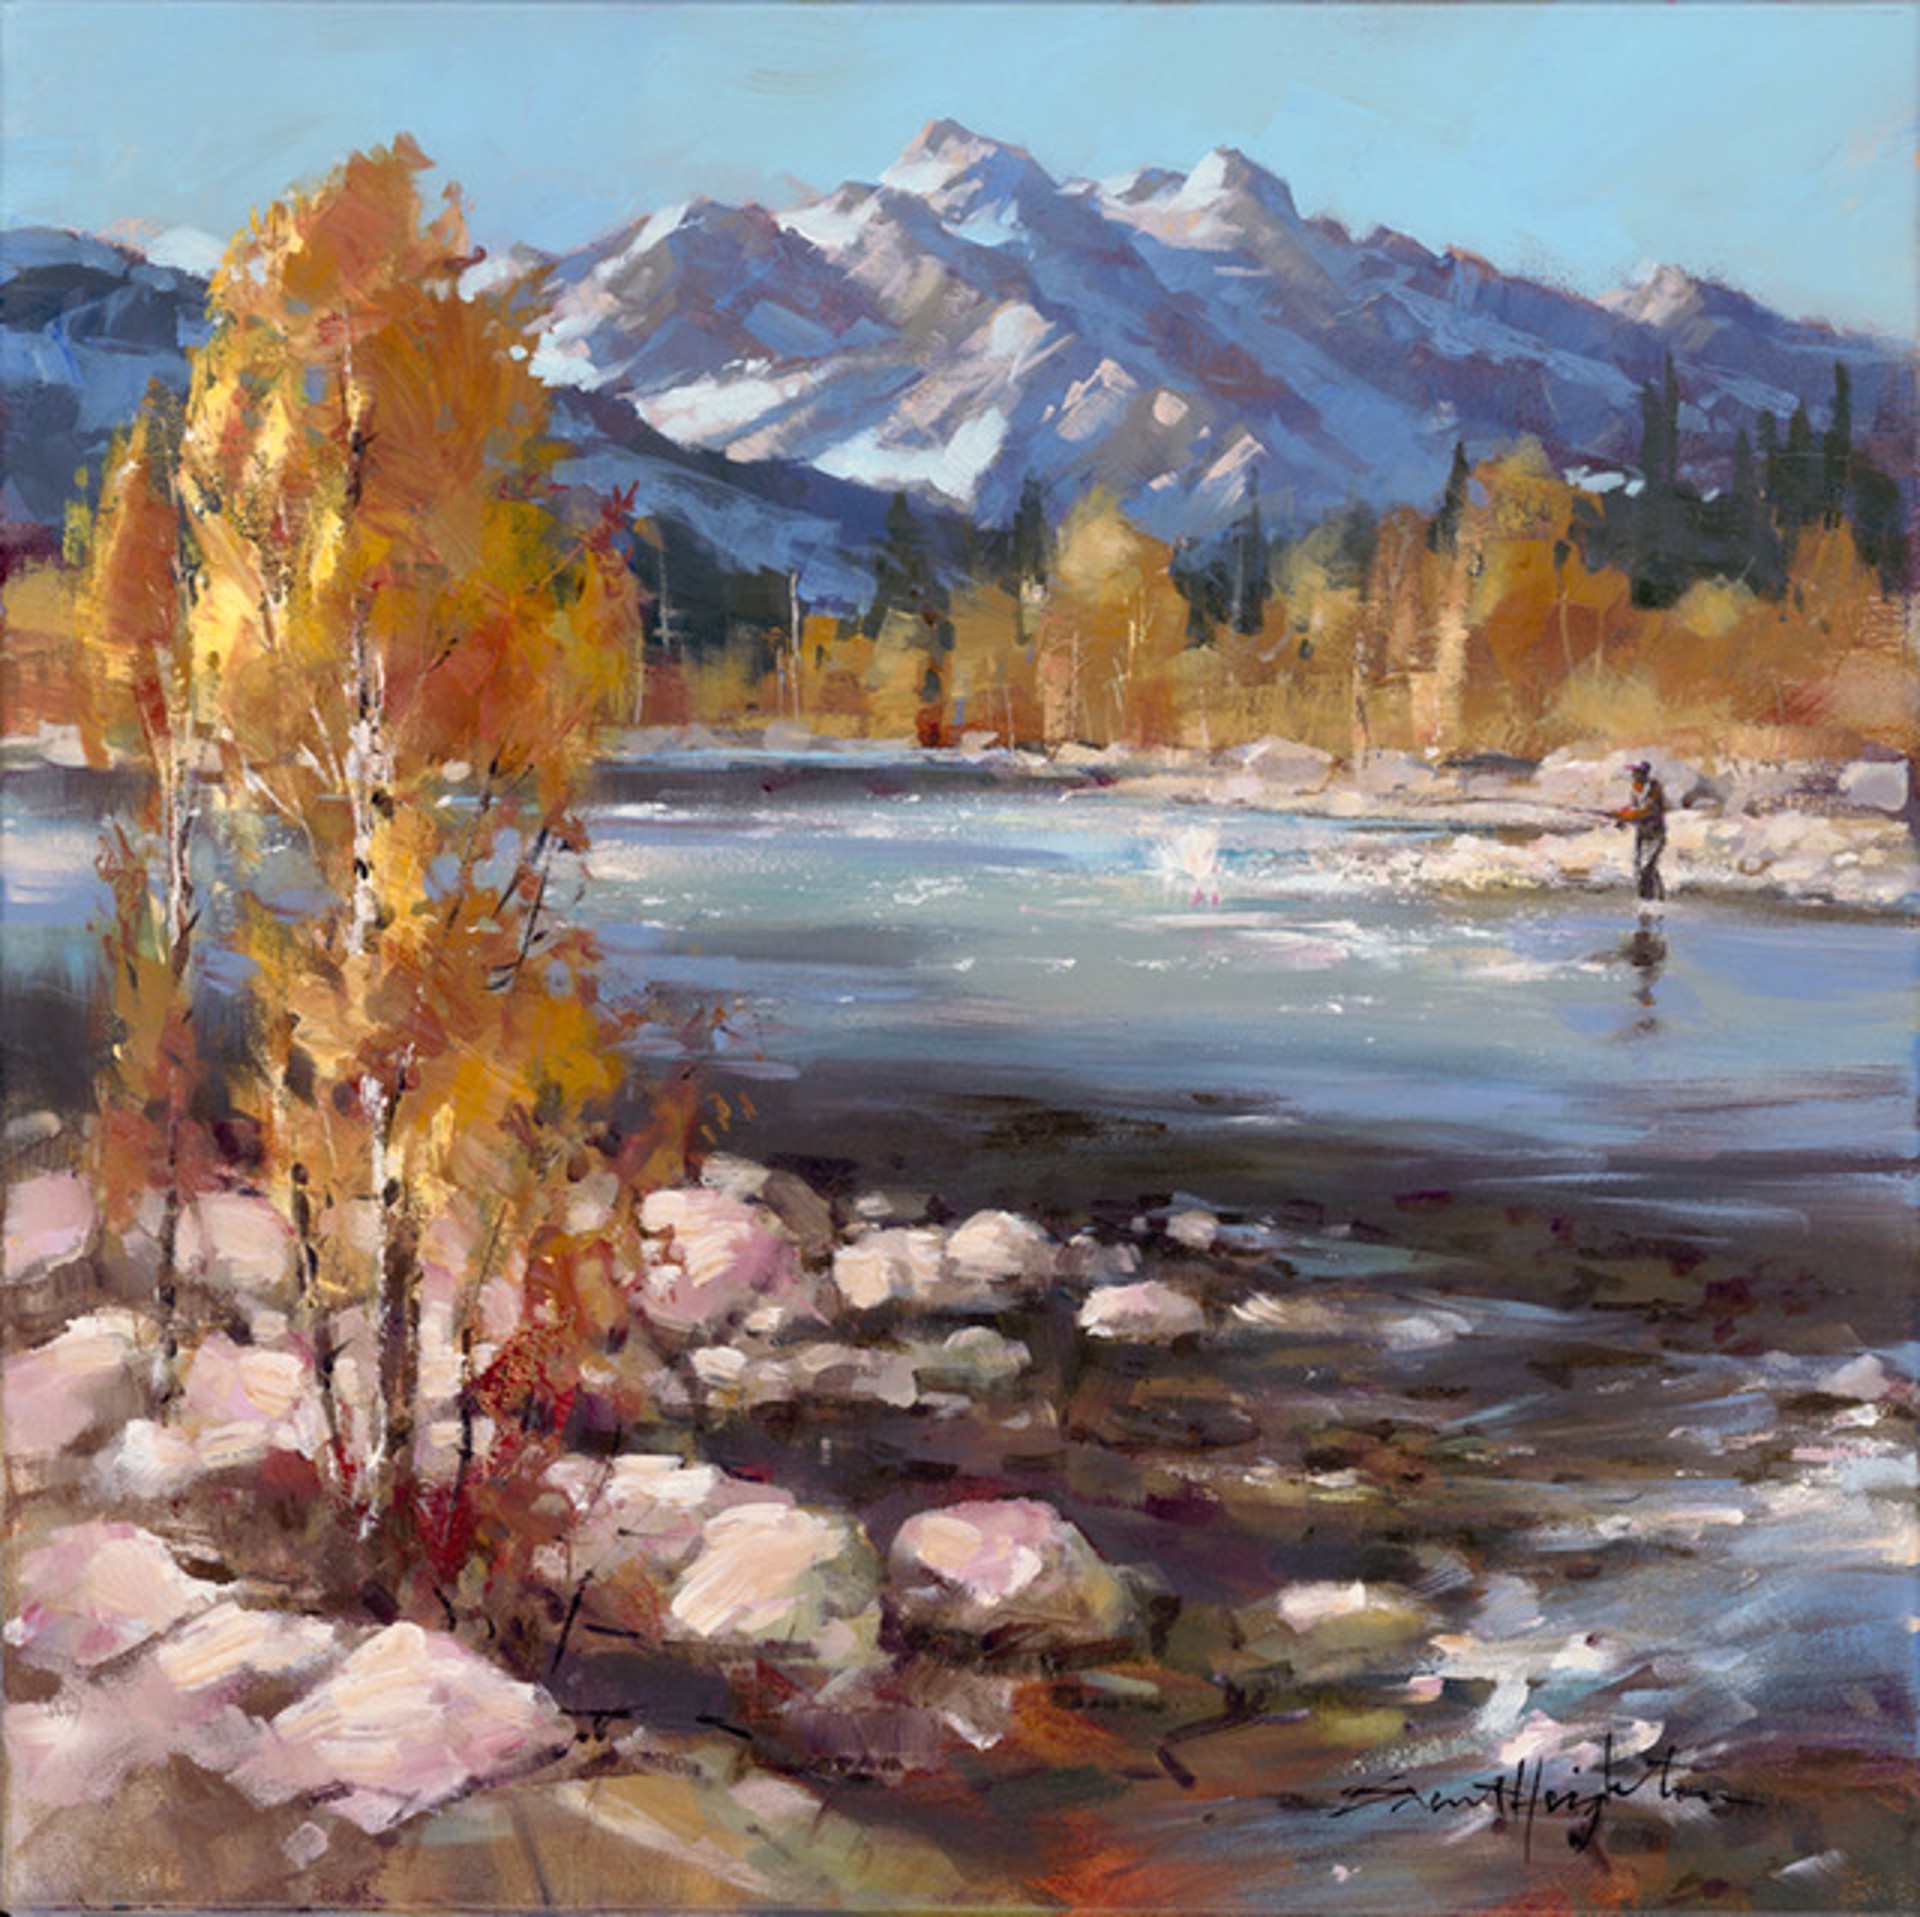 Silence is Golden by Brent Heighton